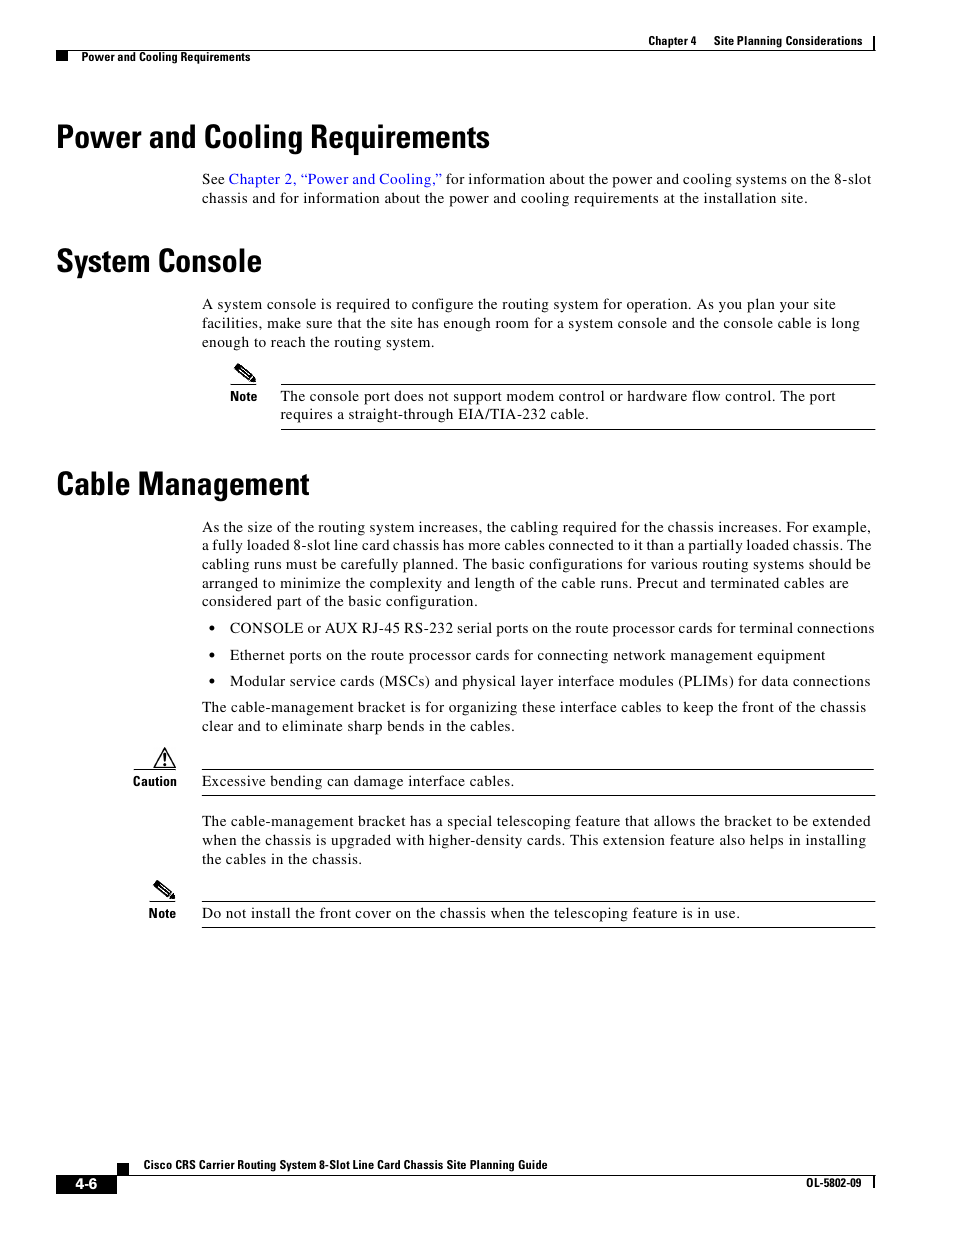 Power and cooling requirements, System console, Cable management | Cisco CRS-1 User Manual | Page 54 / 70